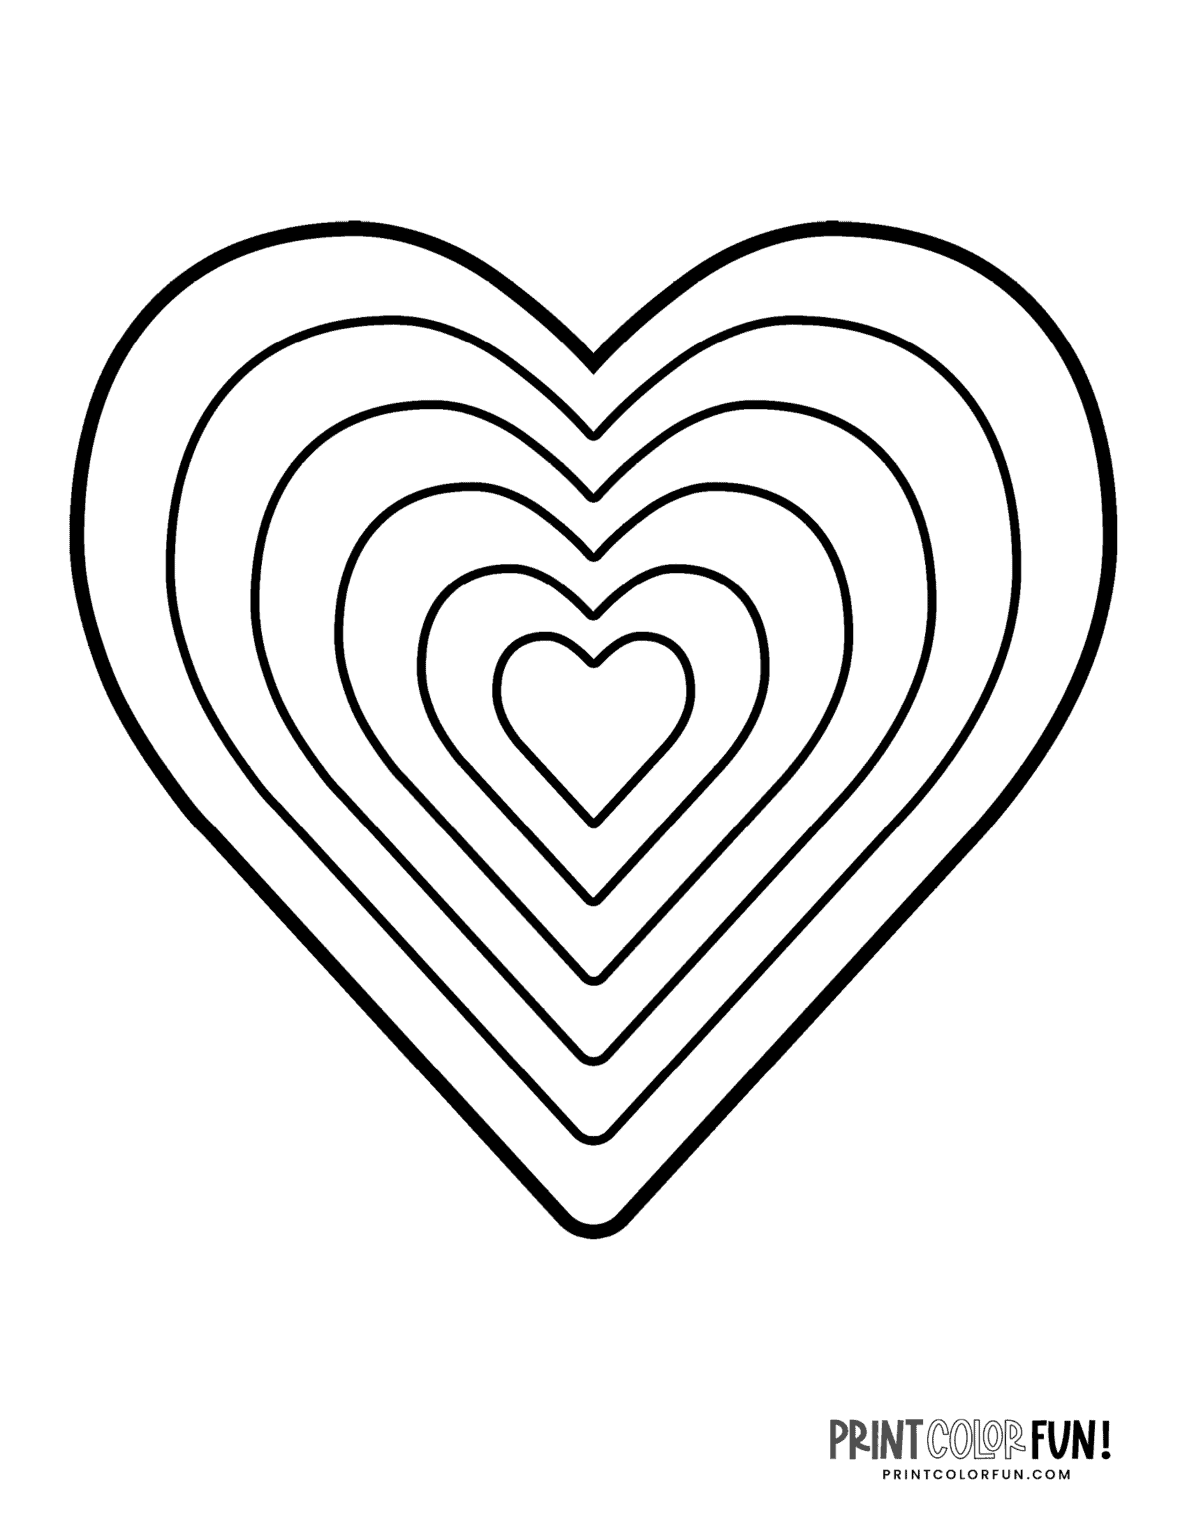 heart coloring pages free printable Hearts printable coloring pages ...